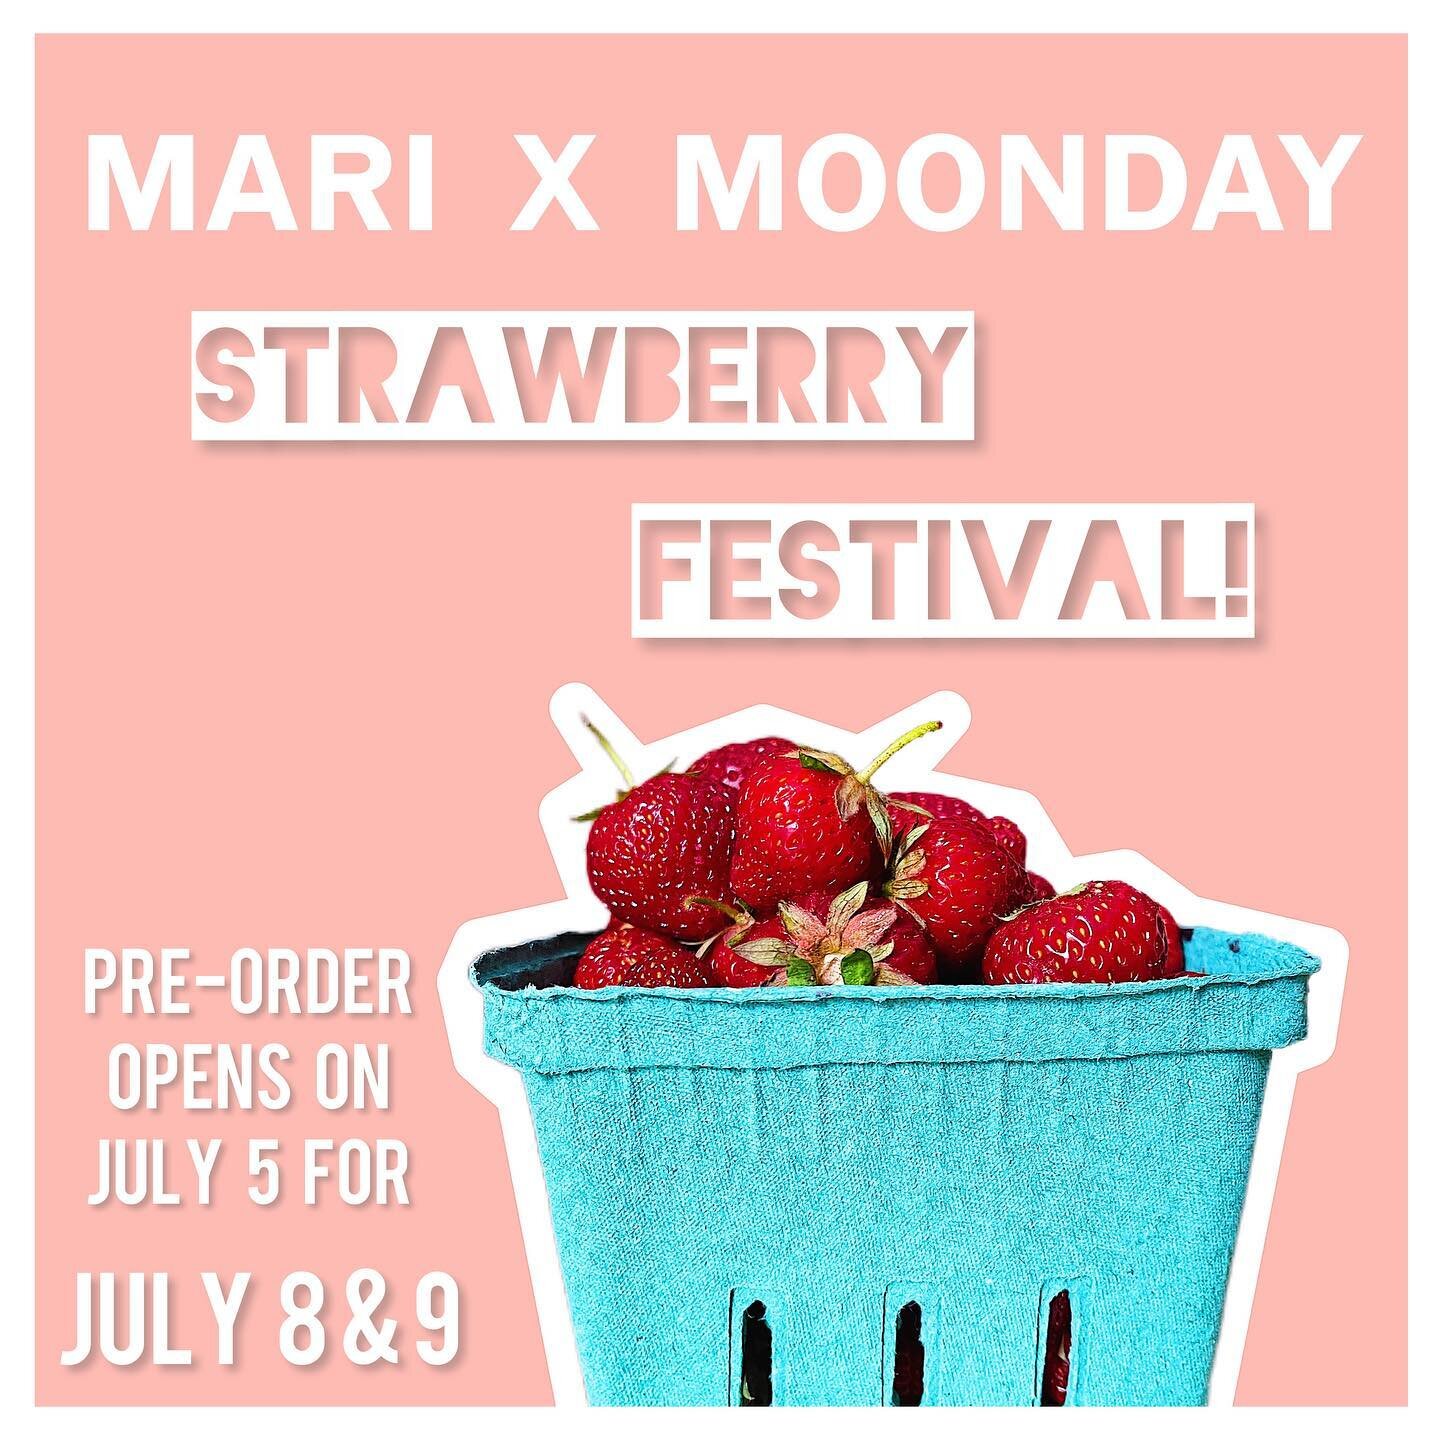 Happy Strawberry Festival!

@kelseymari_ has been fervently hoarding fruit, and has pulled from her dreams an all-strawberry menu to celebrate the tiny, ephemeral beating heart of summer in all its luscious glory. Pre-orders are LIVE for this weekend